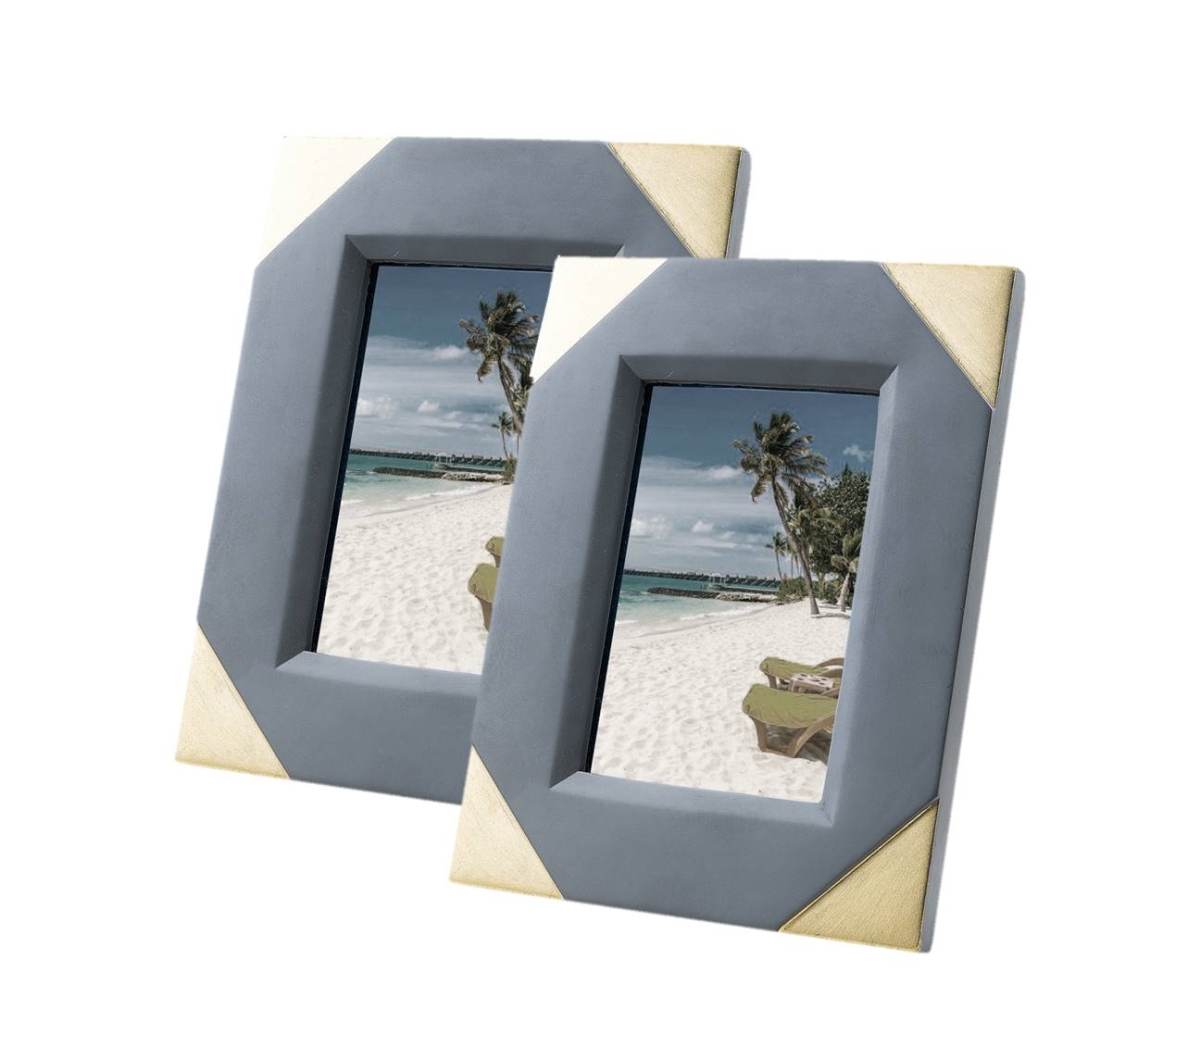 Fra-182-gre Concrete Metallic 4 X 6 In. Picture Frame, Grey - Set Of 2